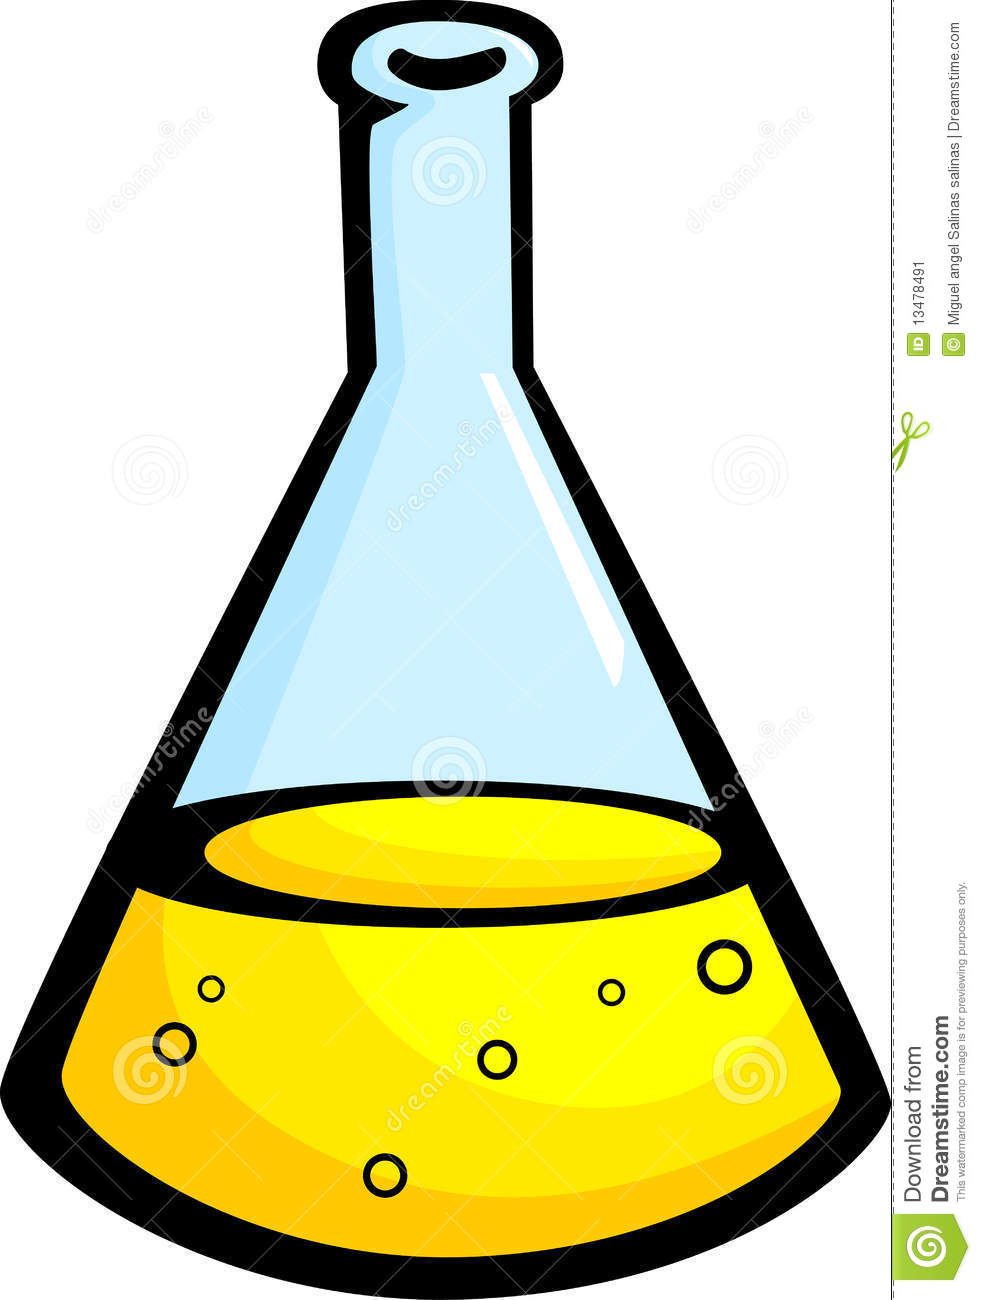 Chemical In Flask Vector Illustration Stock Image   Image  13478491